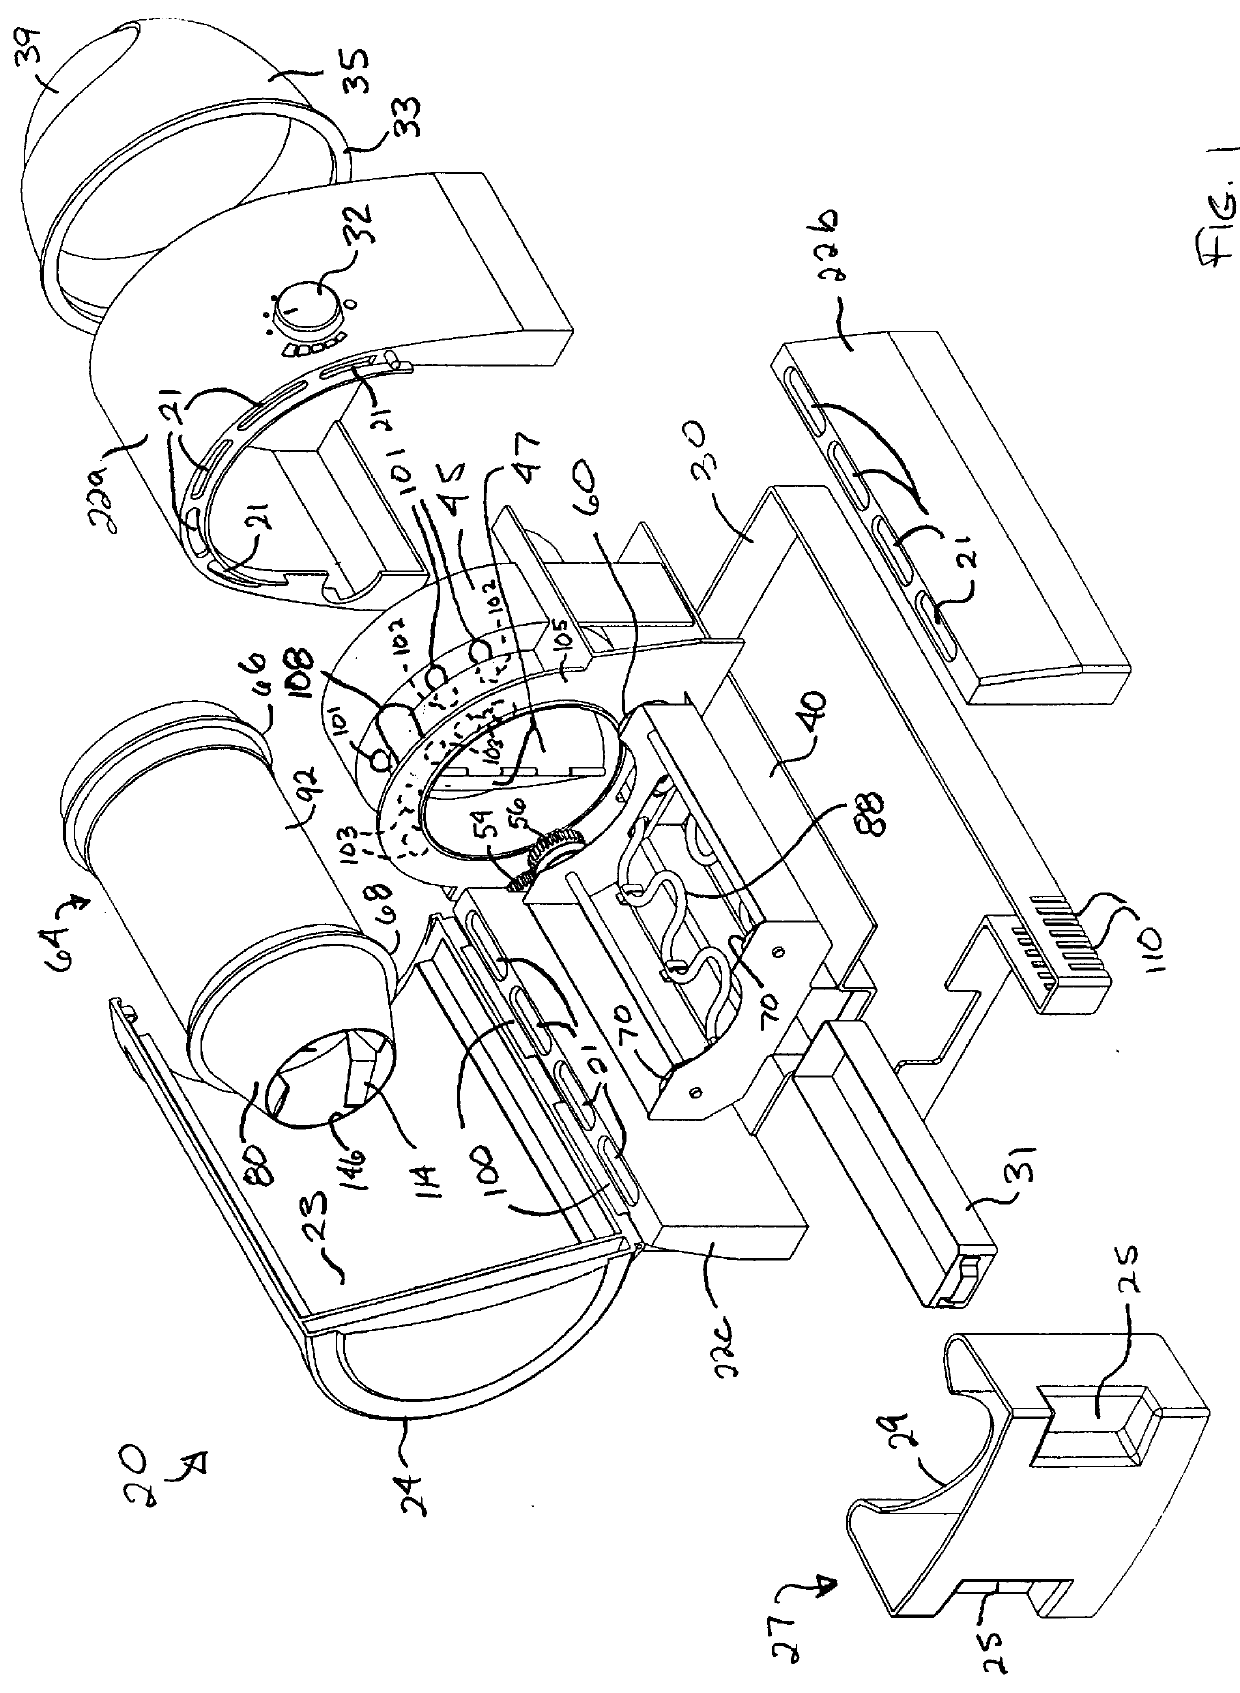 Method and apparatus for roasting coffee beans